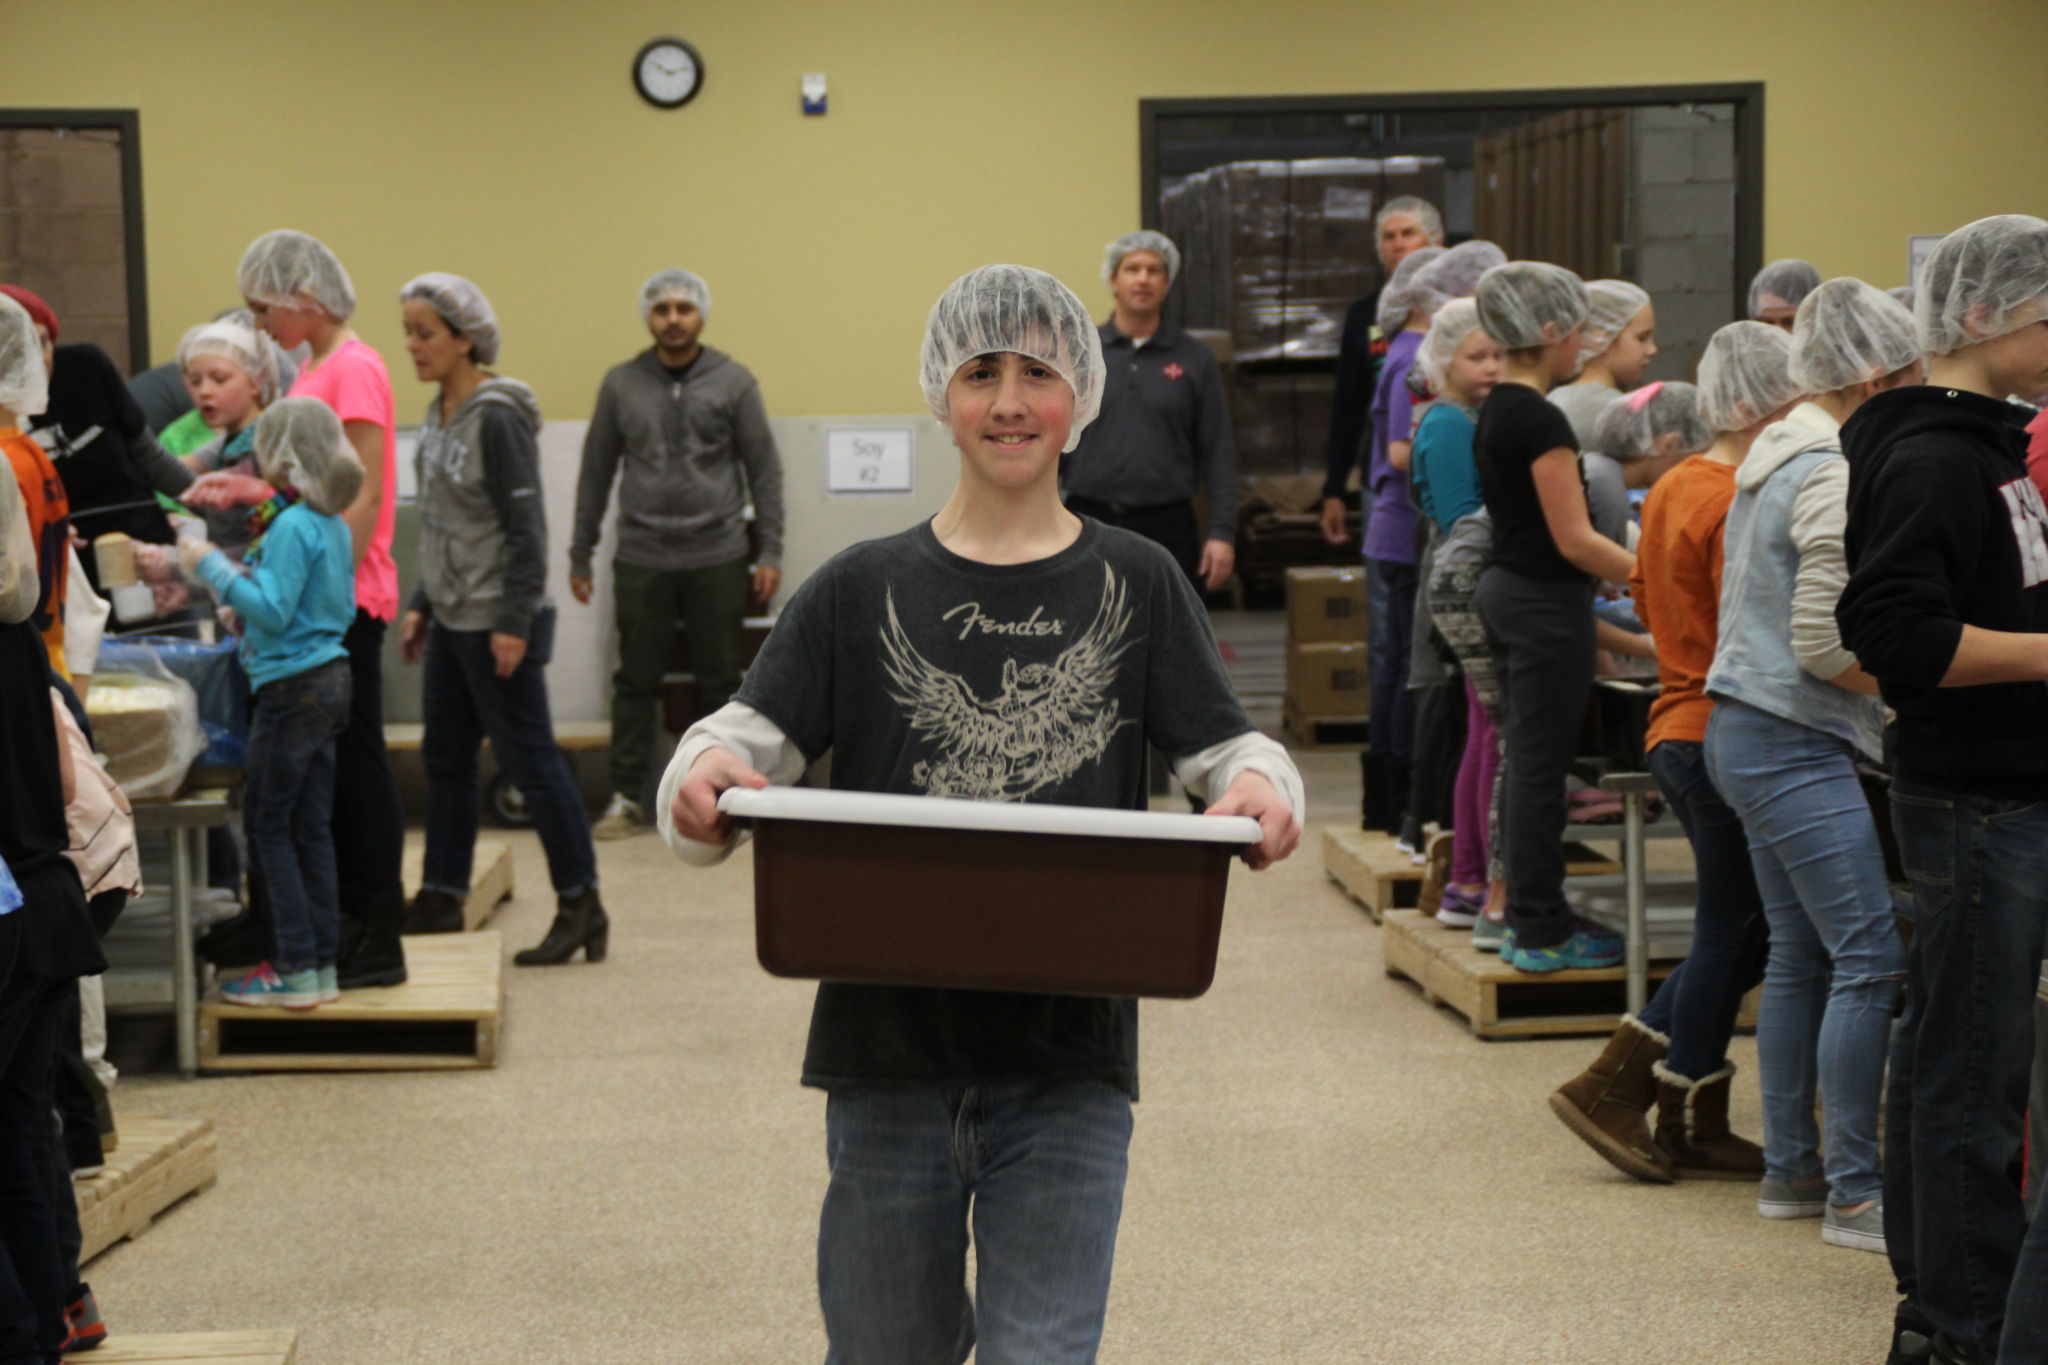 Riverside heads to Feed my Starving Children